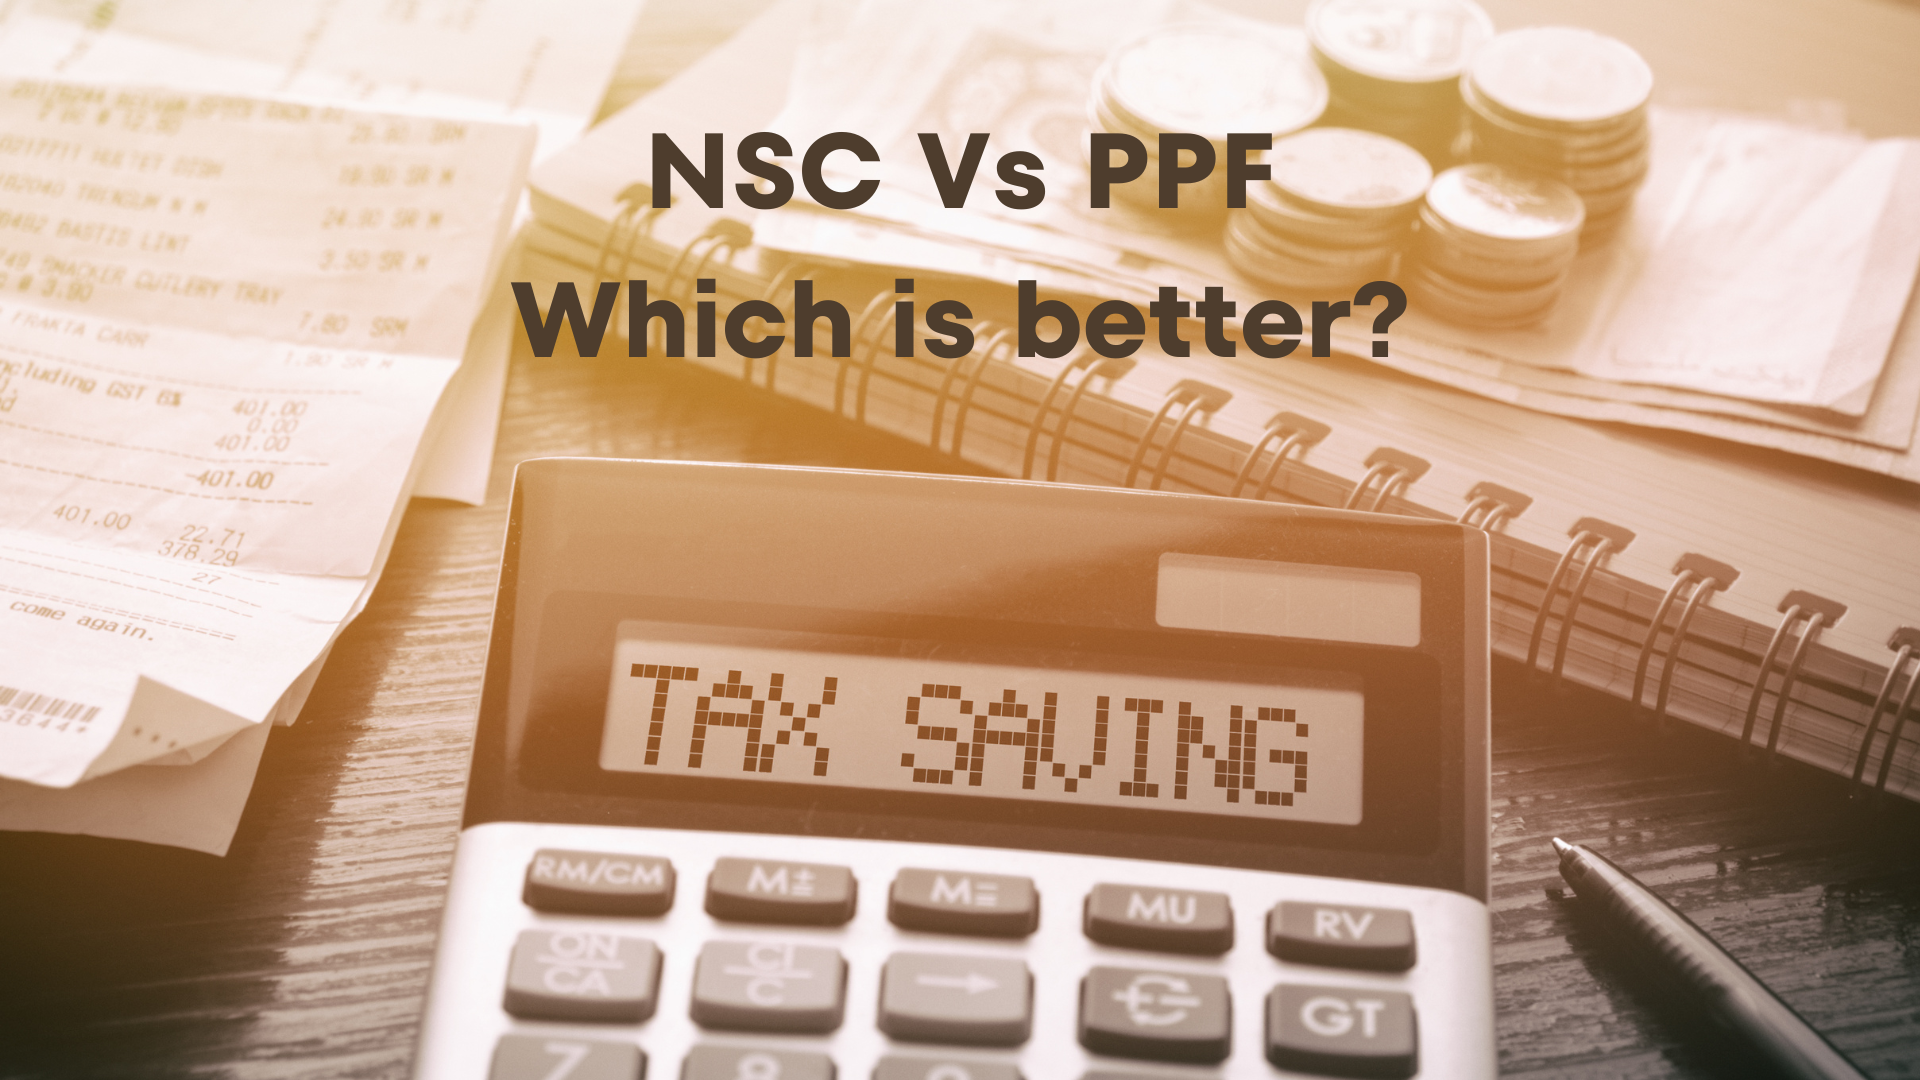 NSC vs PPF feature graphic with a calculator showing tax saving on the display